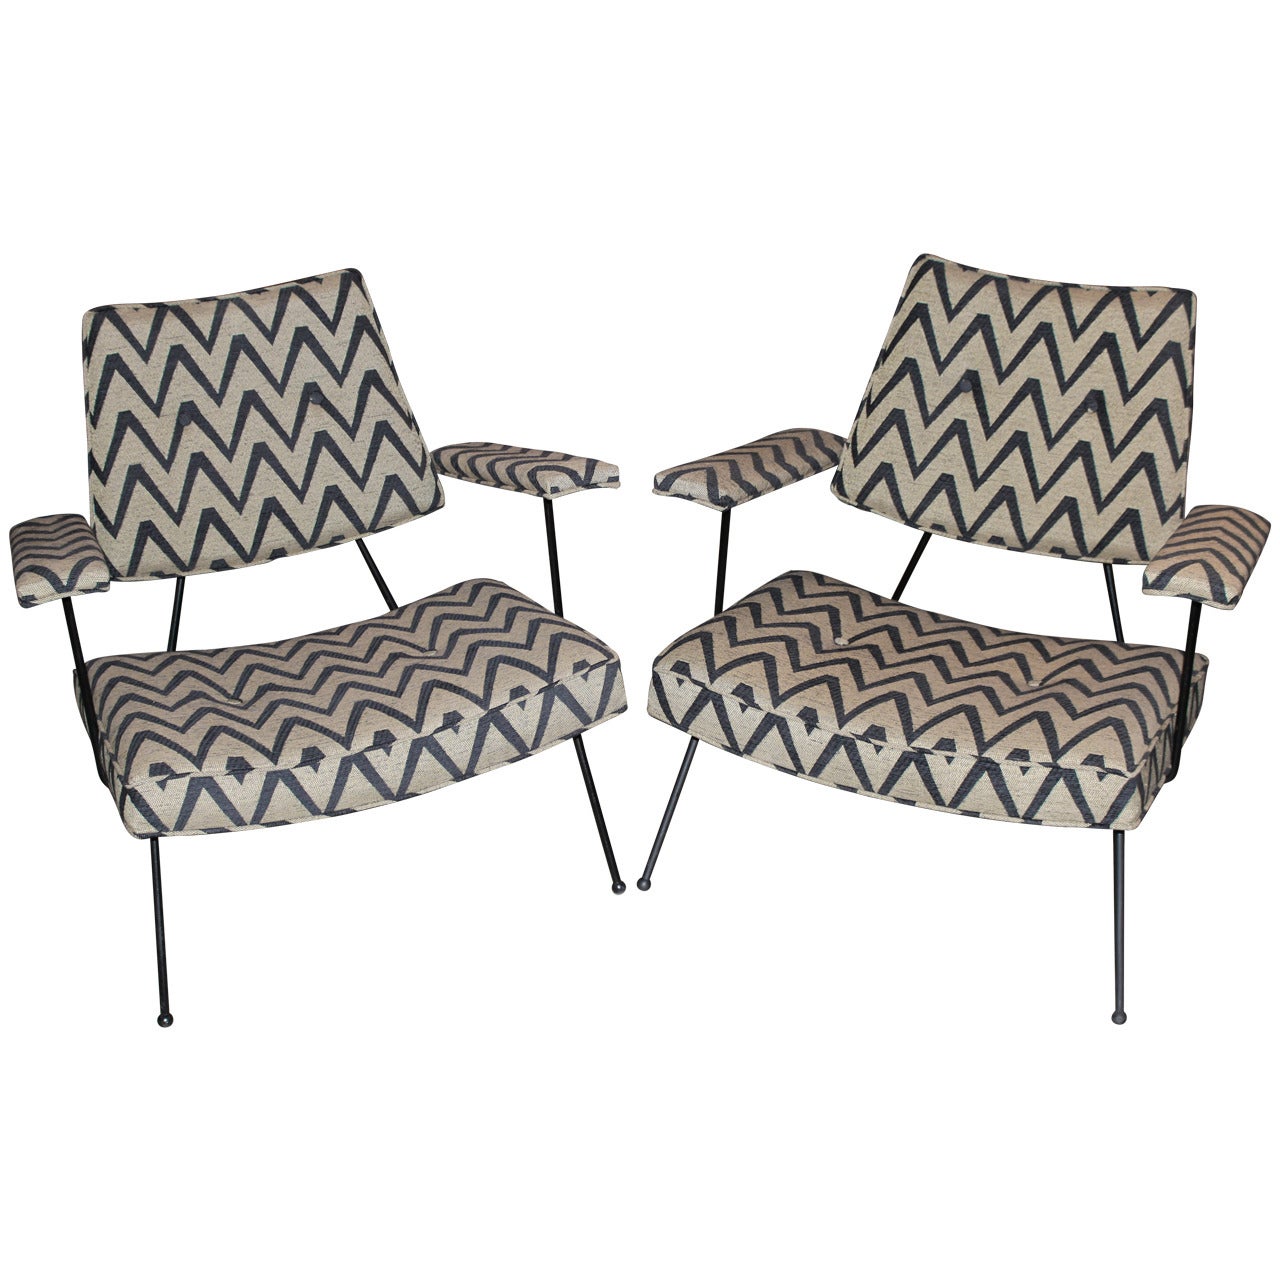 Pair of Iron Adrian Pearsall Upholstered Chairs for Plycraft, circa 1970